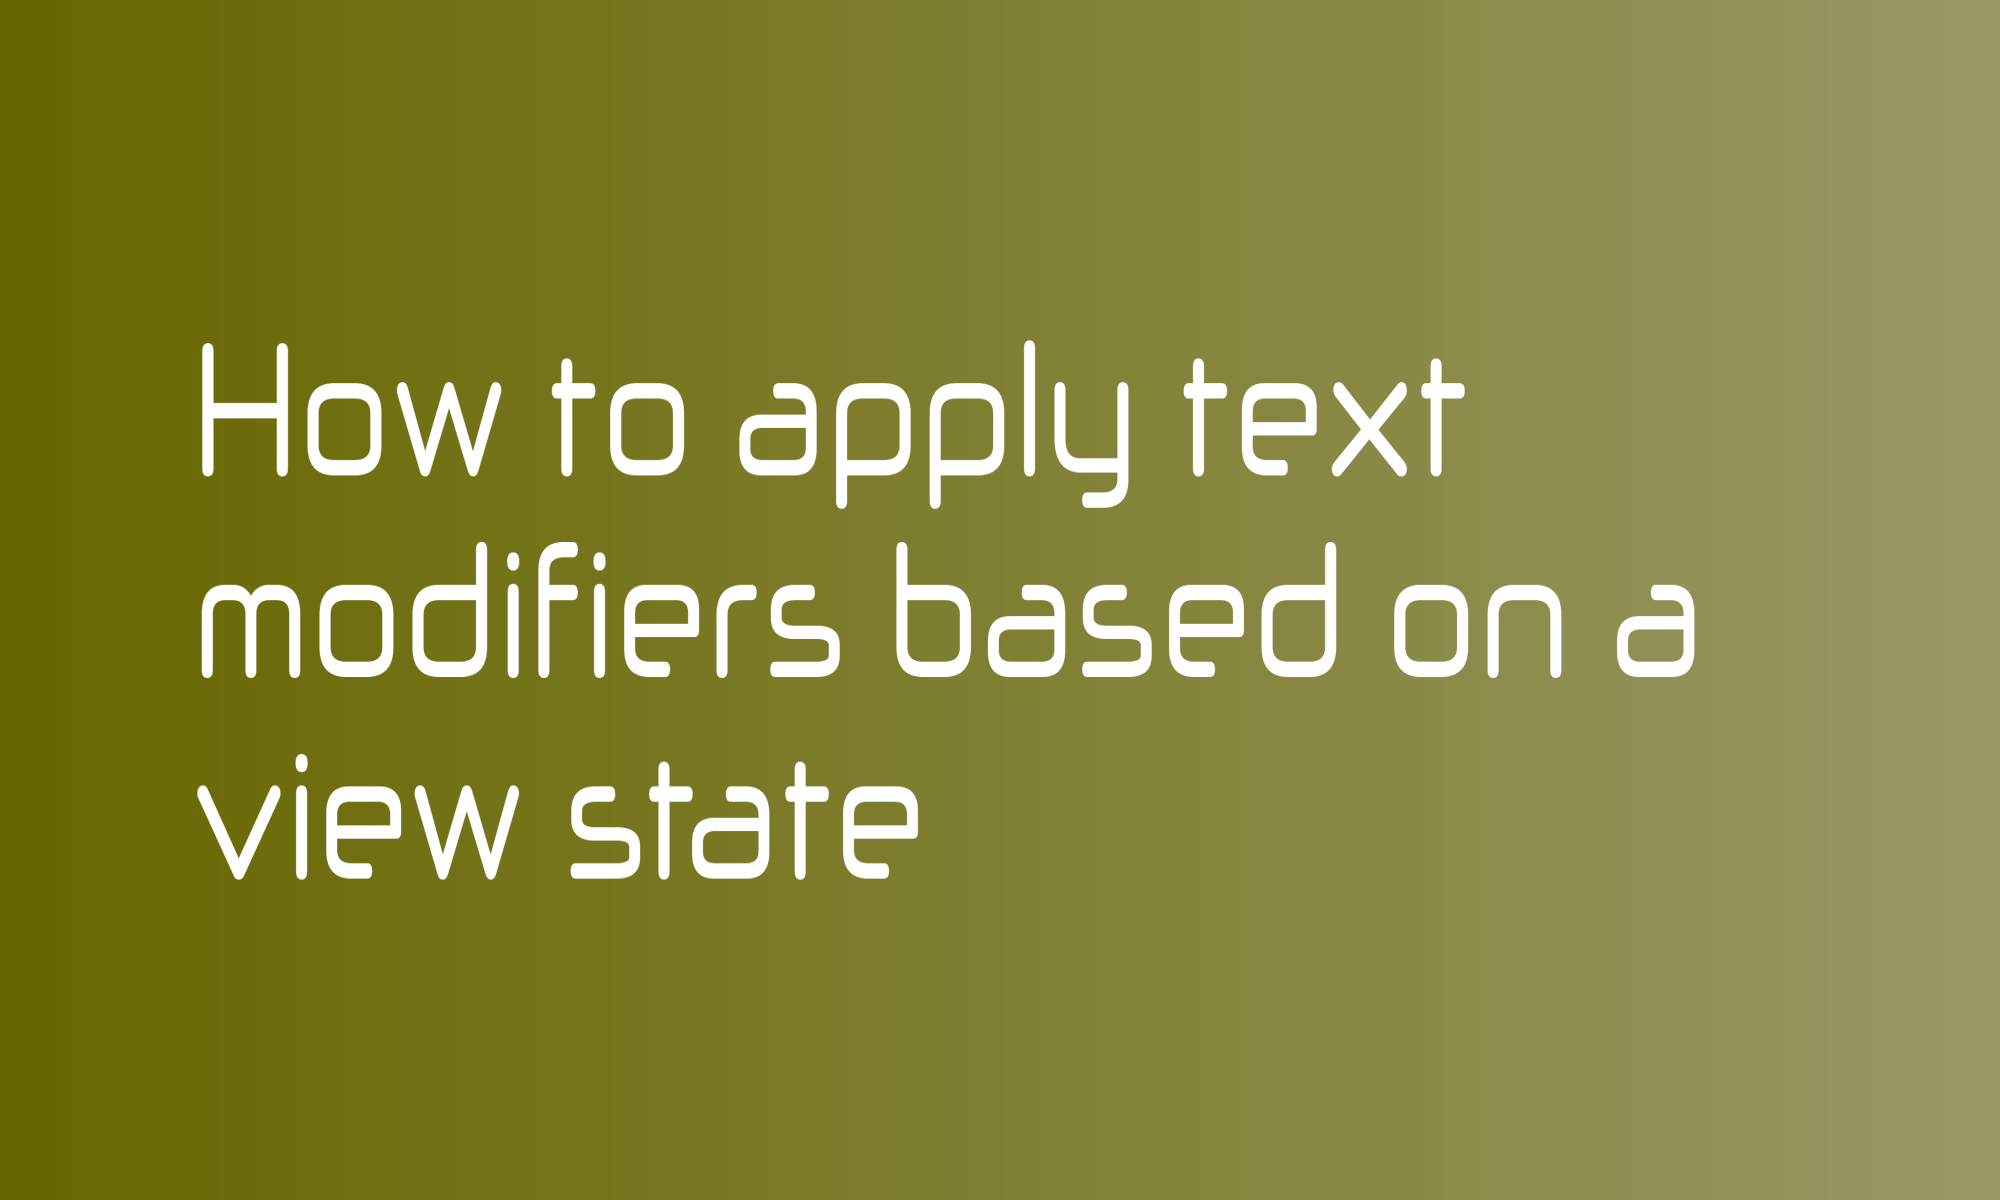 How to apply text modifiers based on a view state